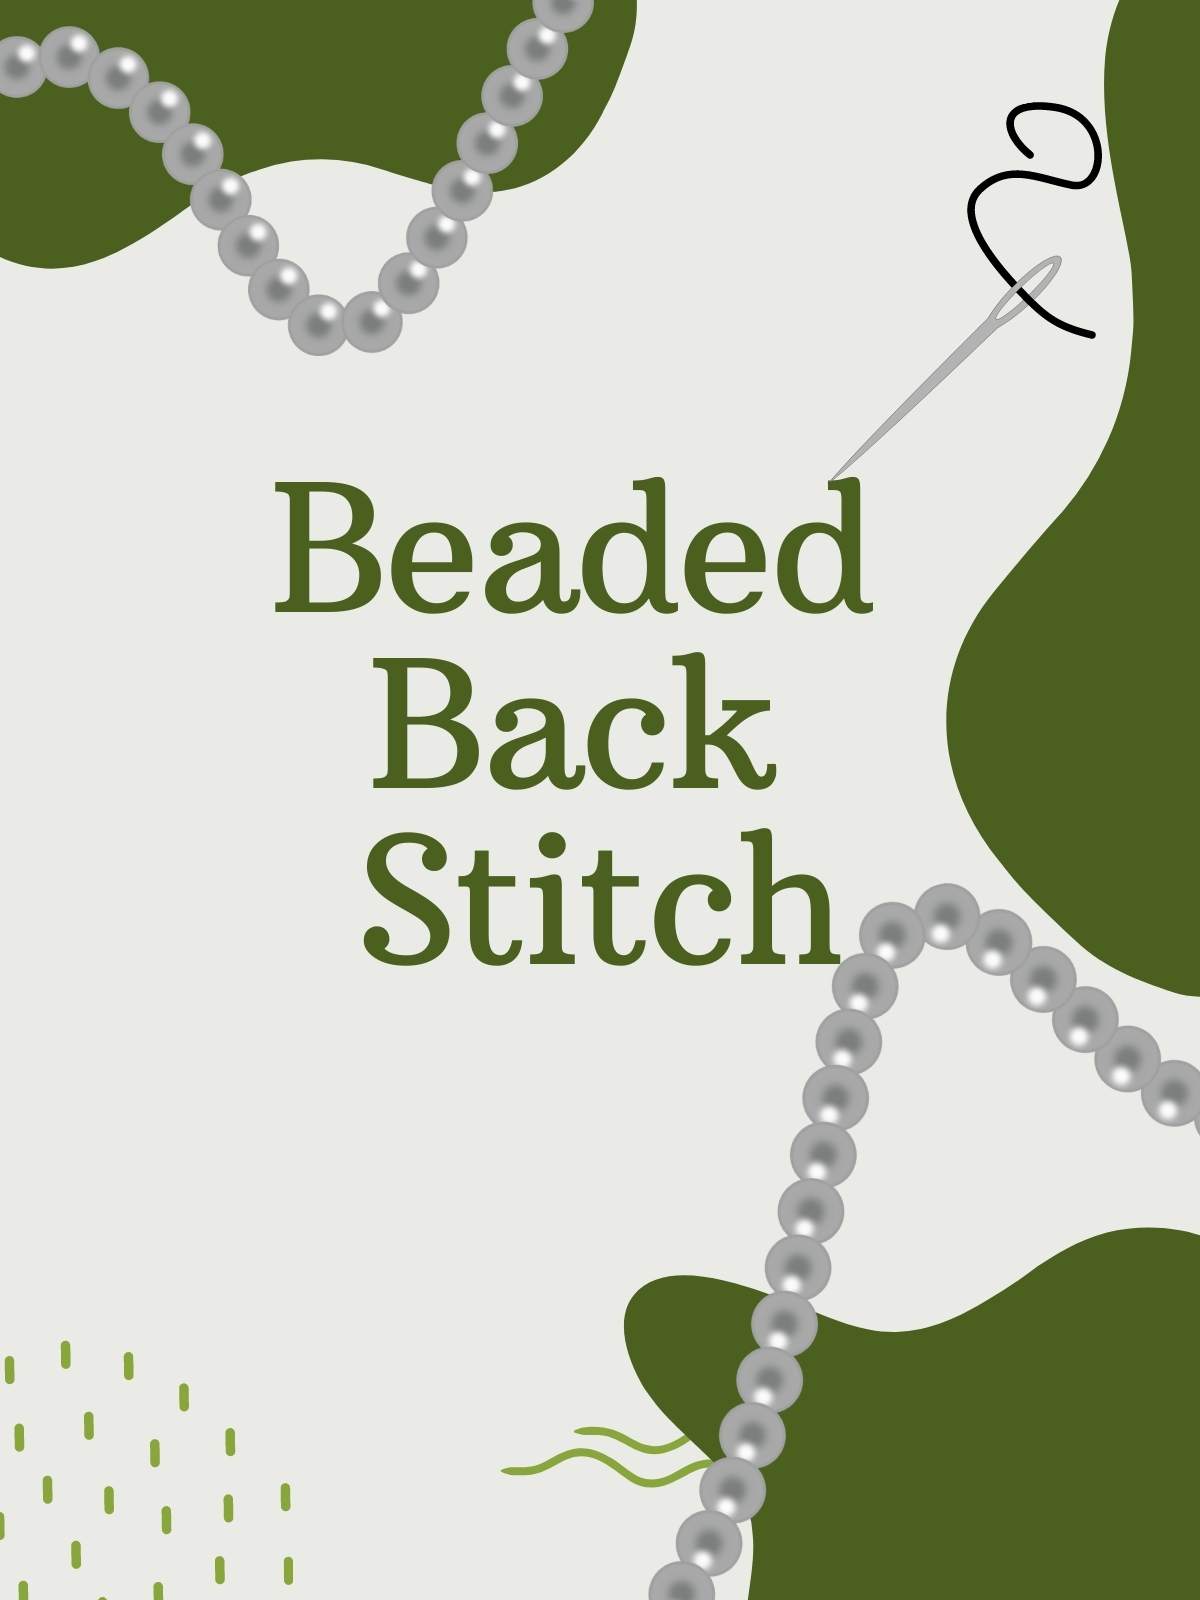 How to do Beaded Back Stitch